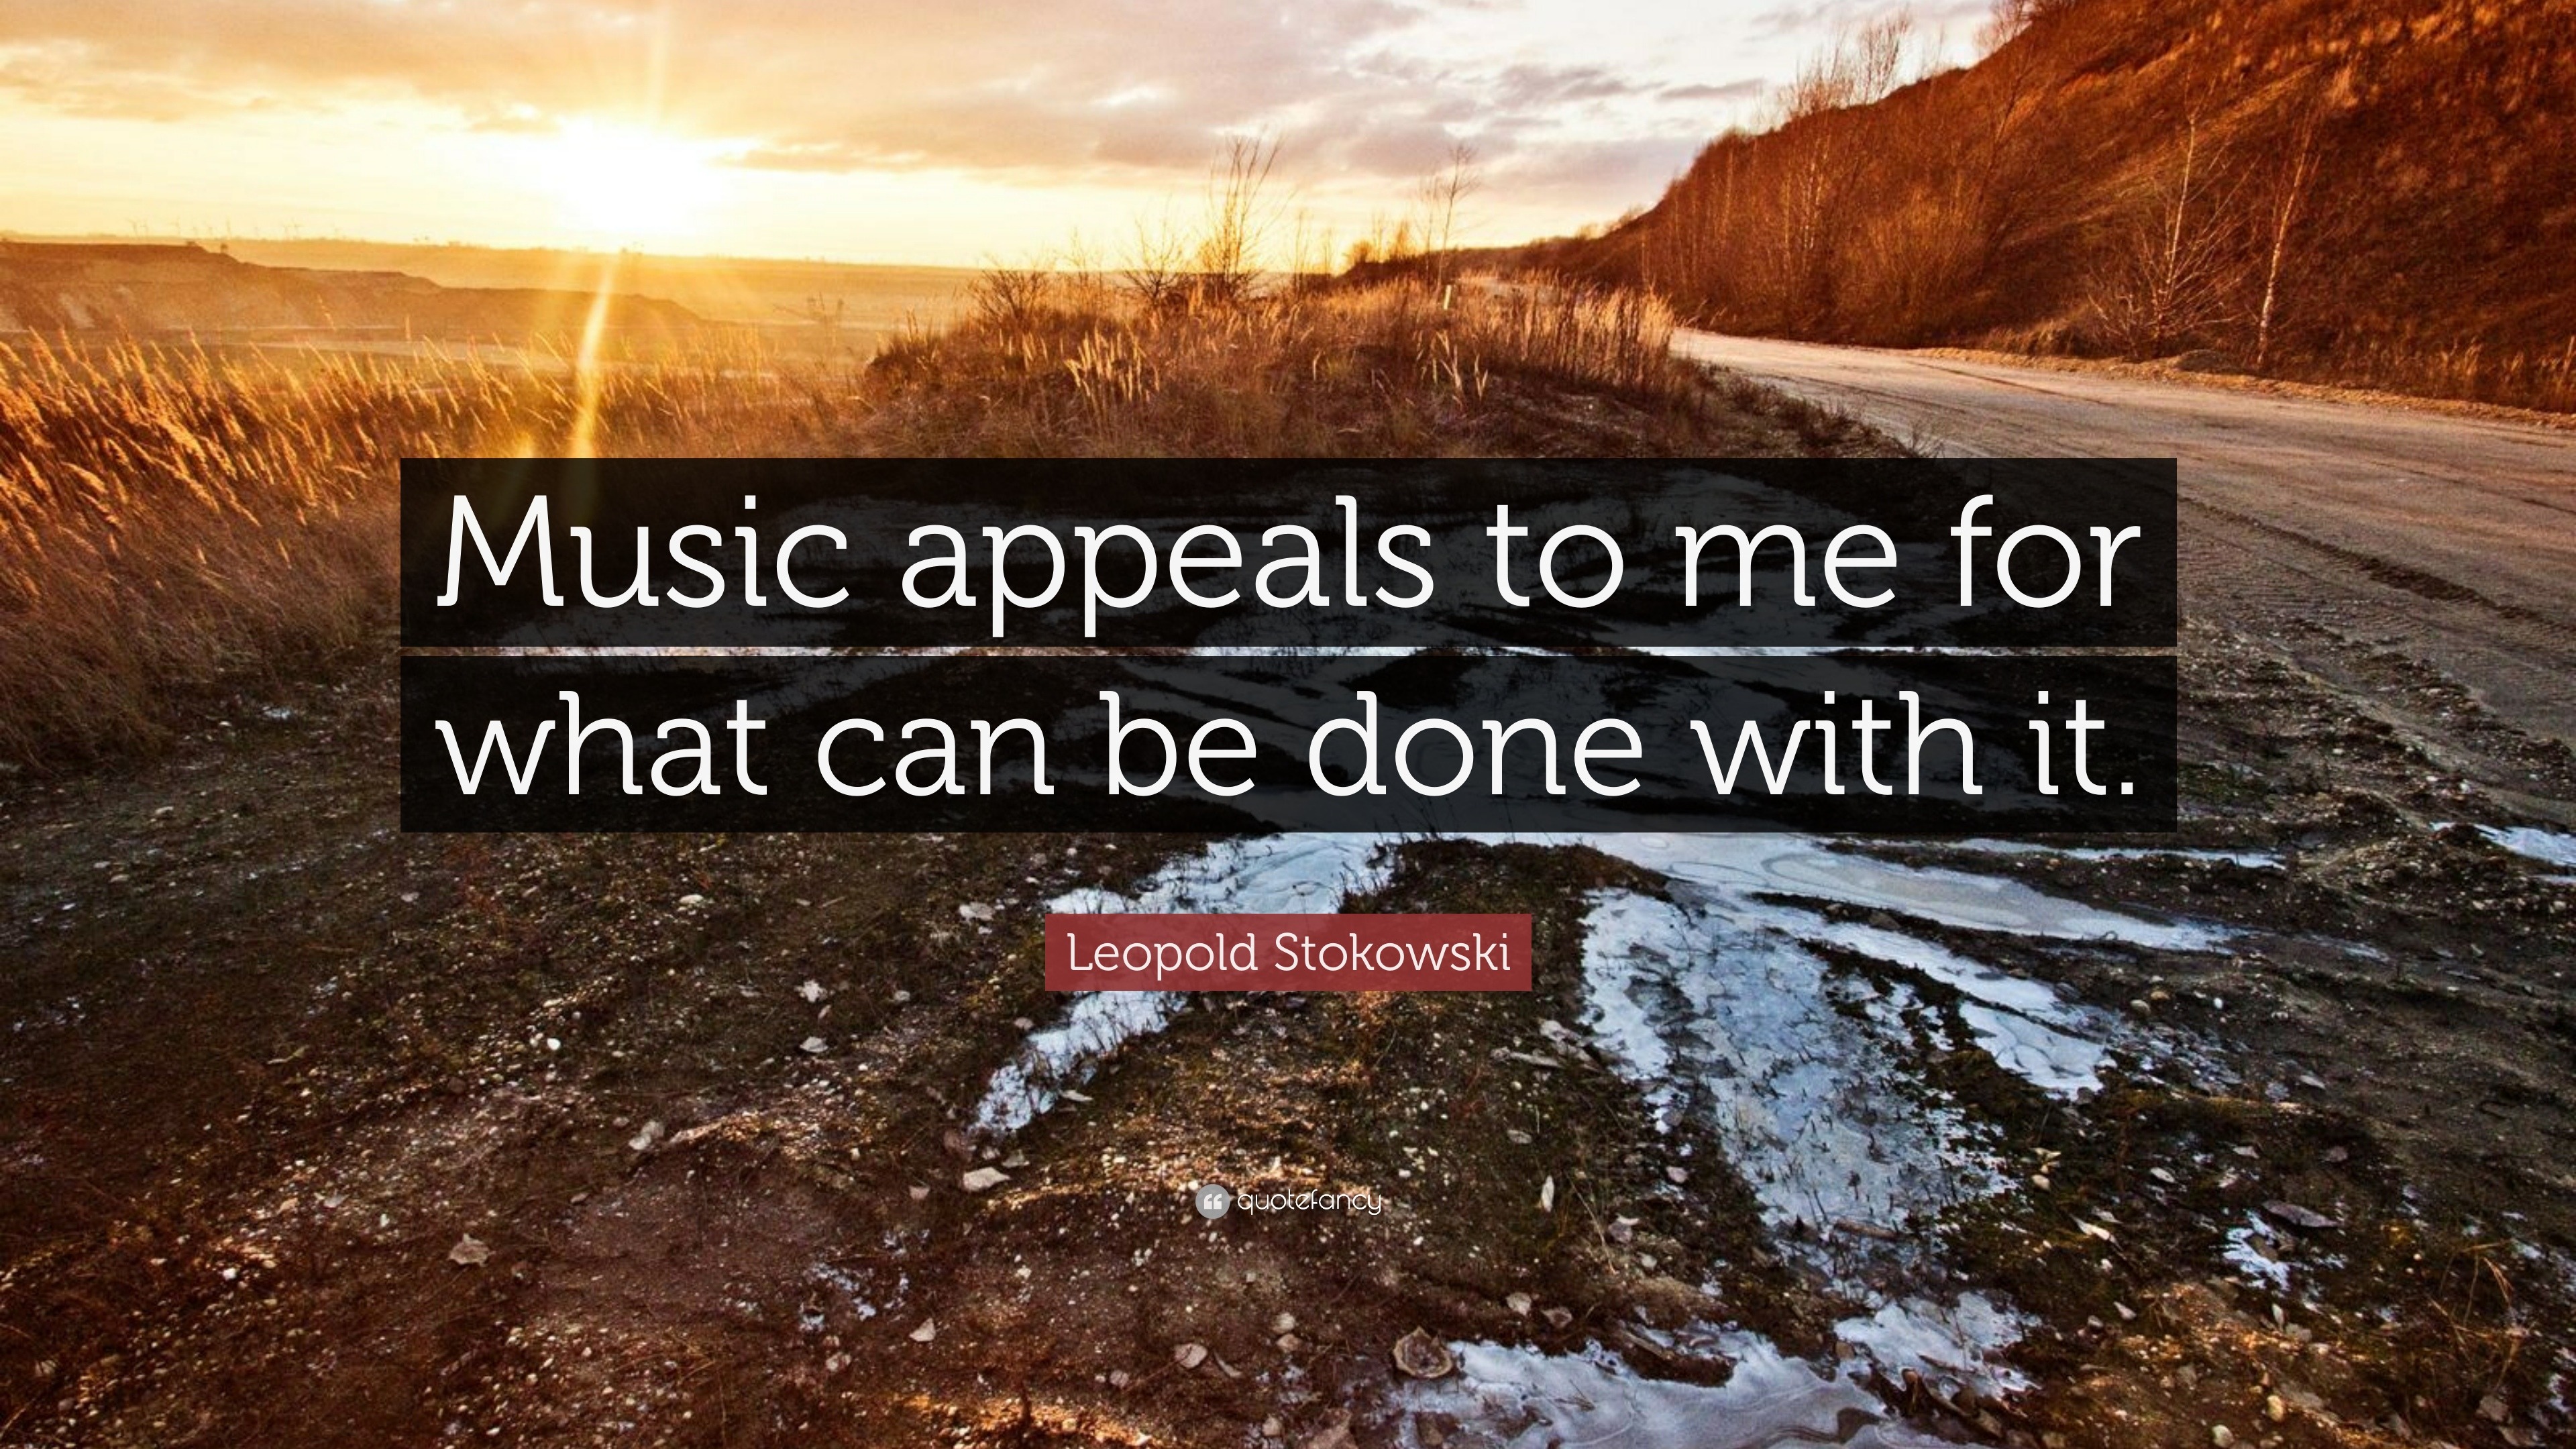 Leopold Stokowski Quote “Music appeals to me for what can be done ...